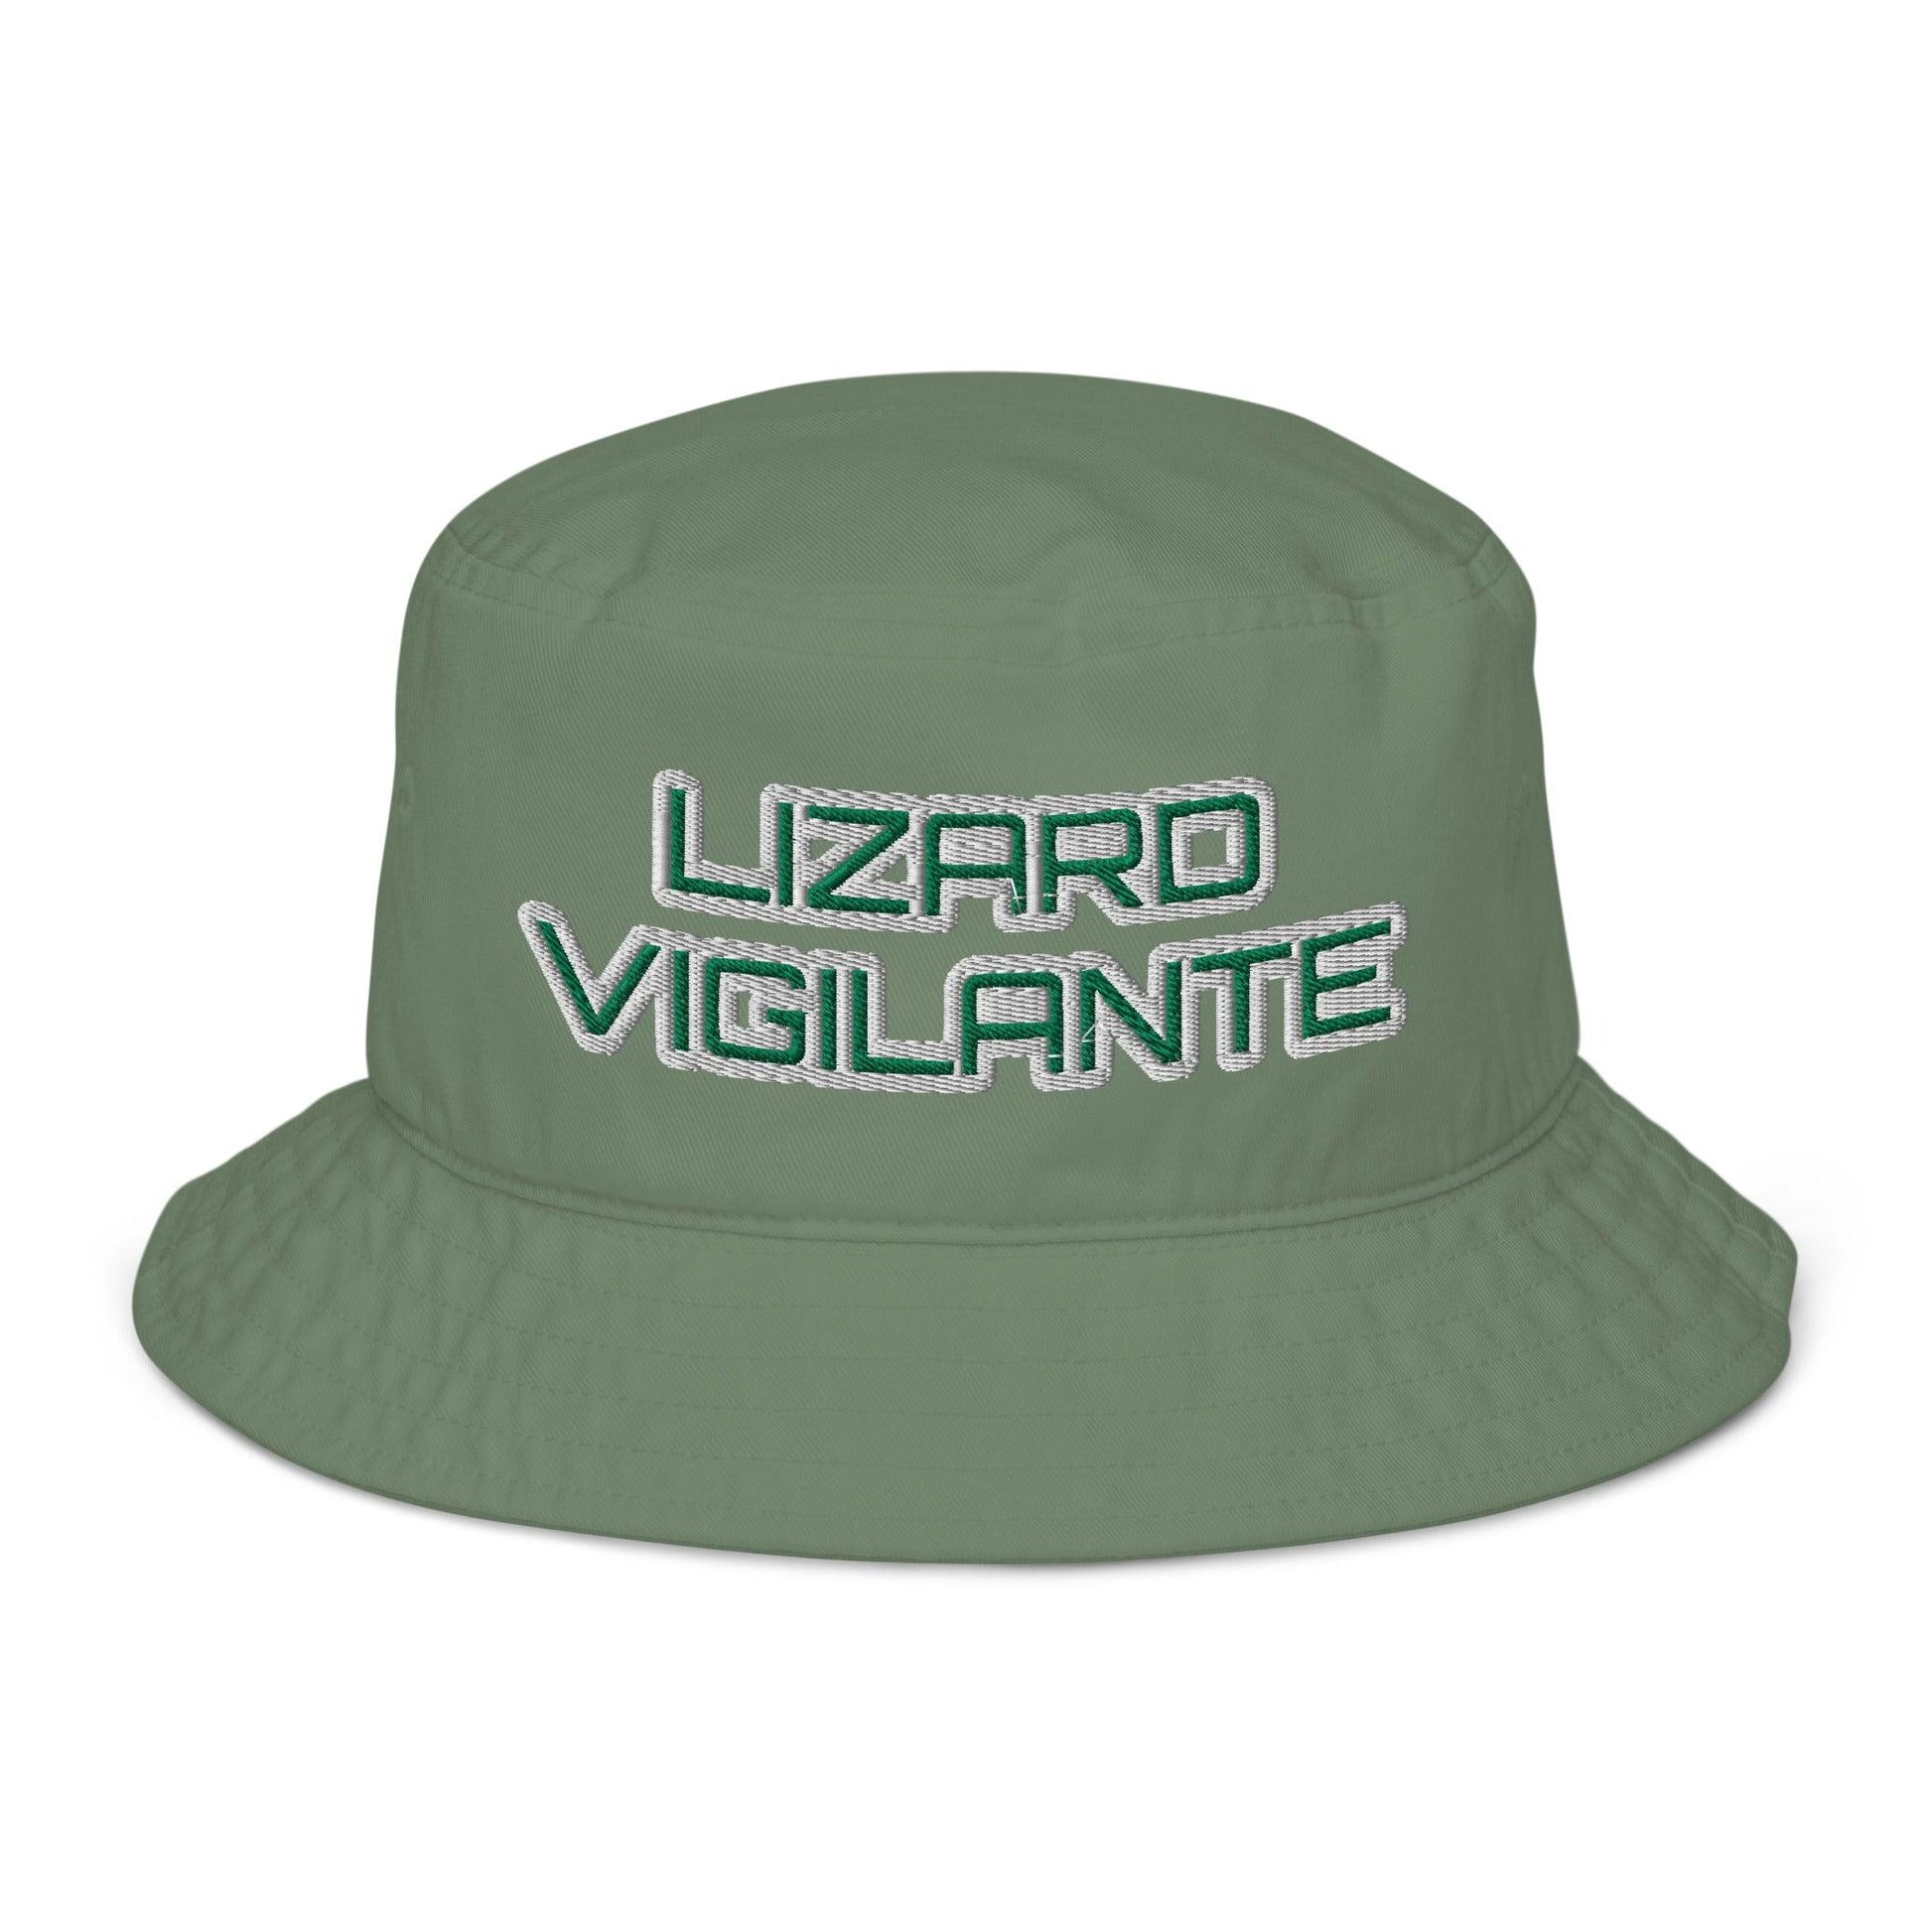 Stay Cool and Trendy with the Lizard Vigilante Organic Bucket Hat - Embrace the Style! - Lizard Vigilante